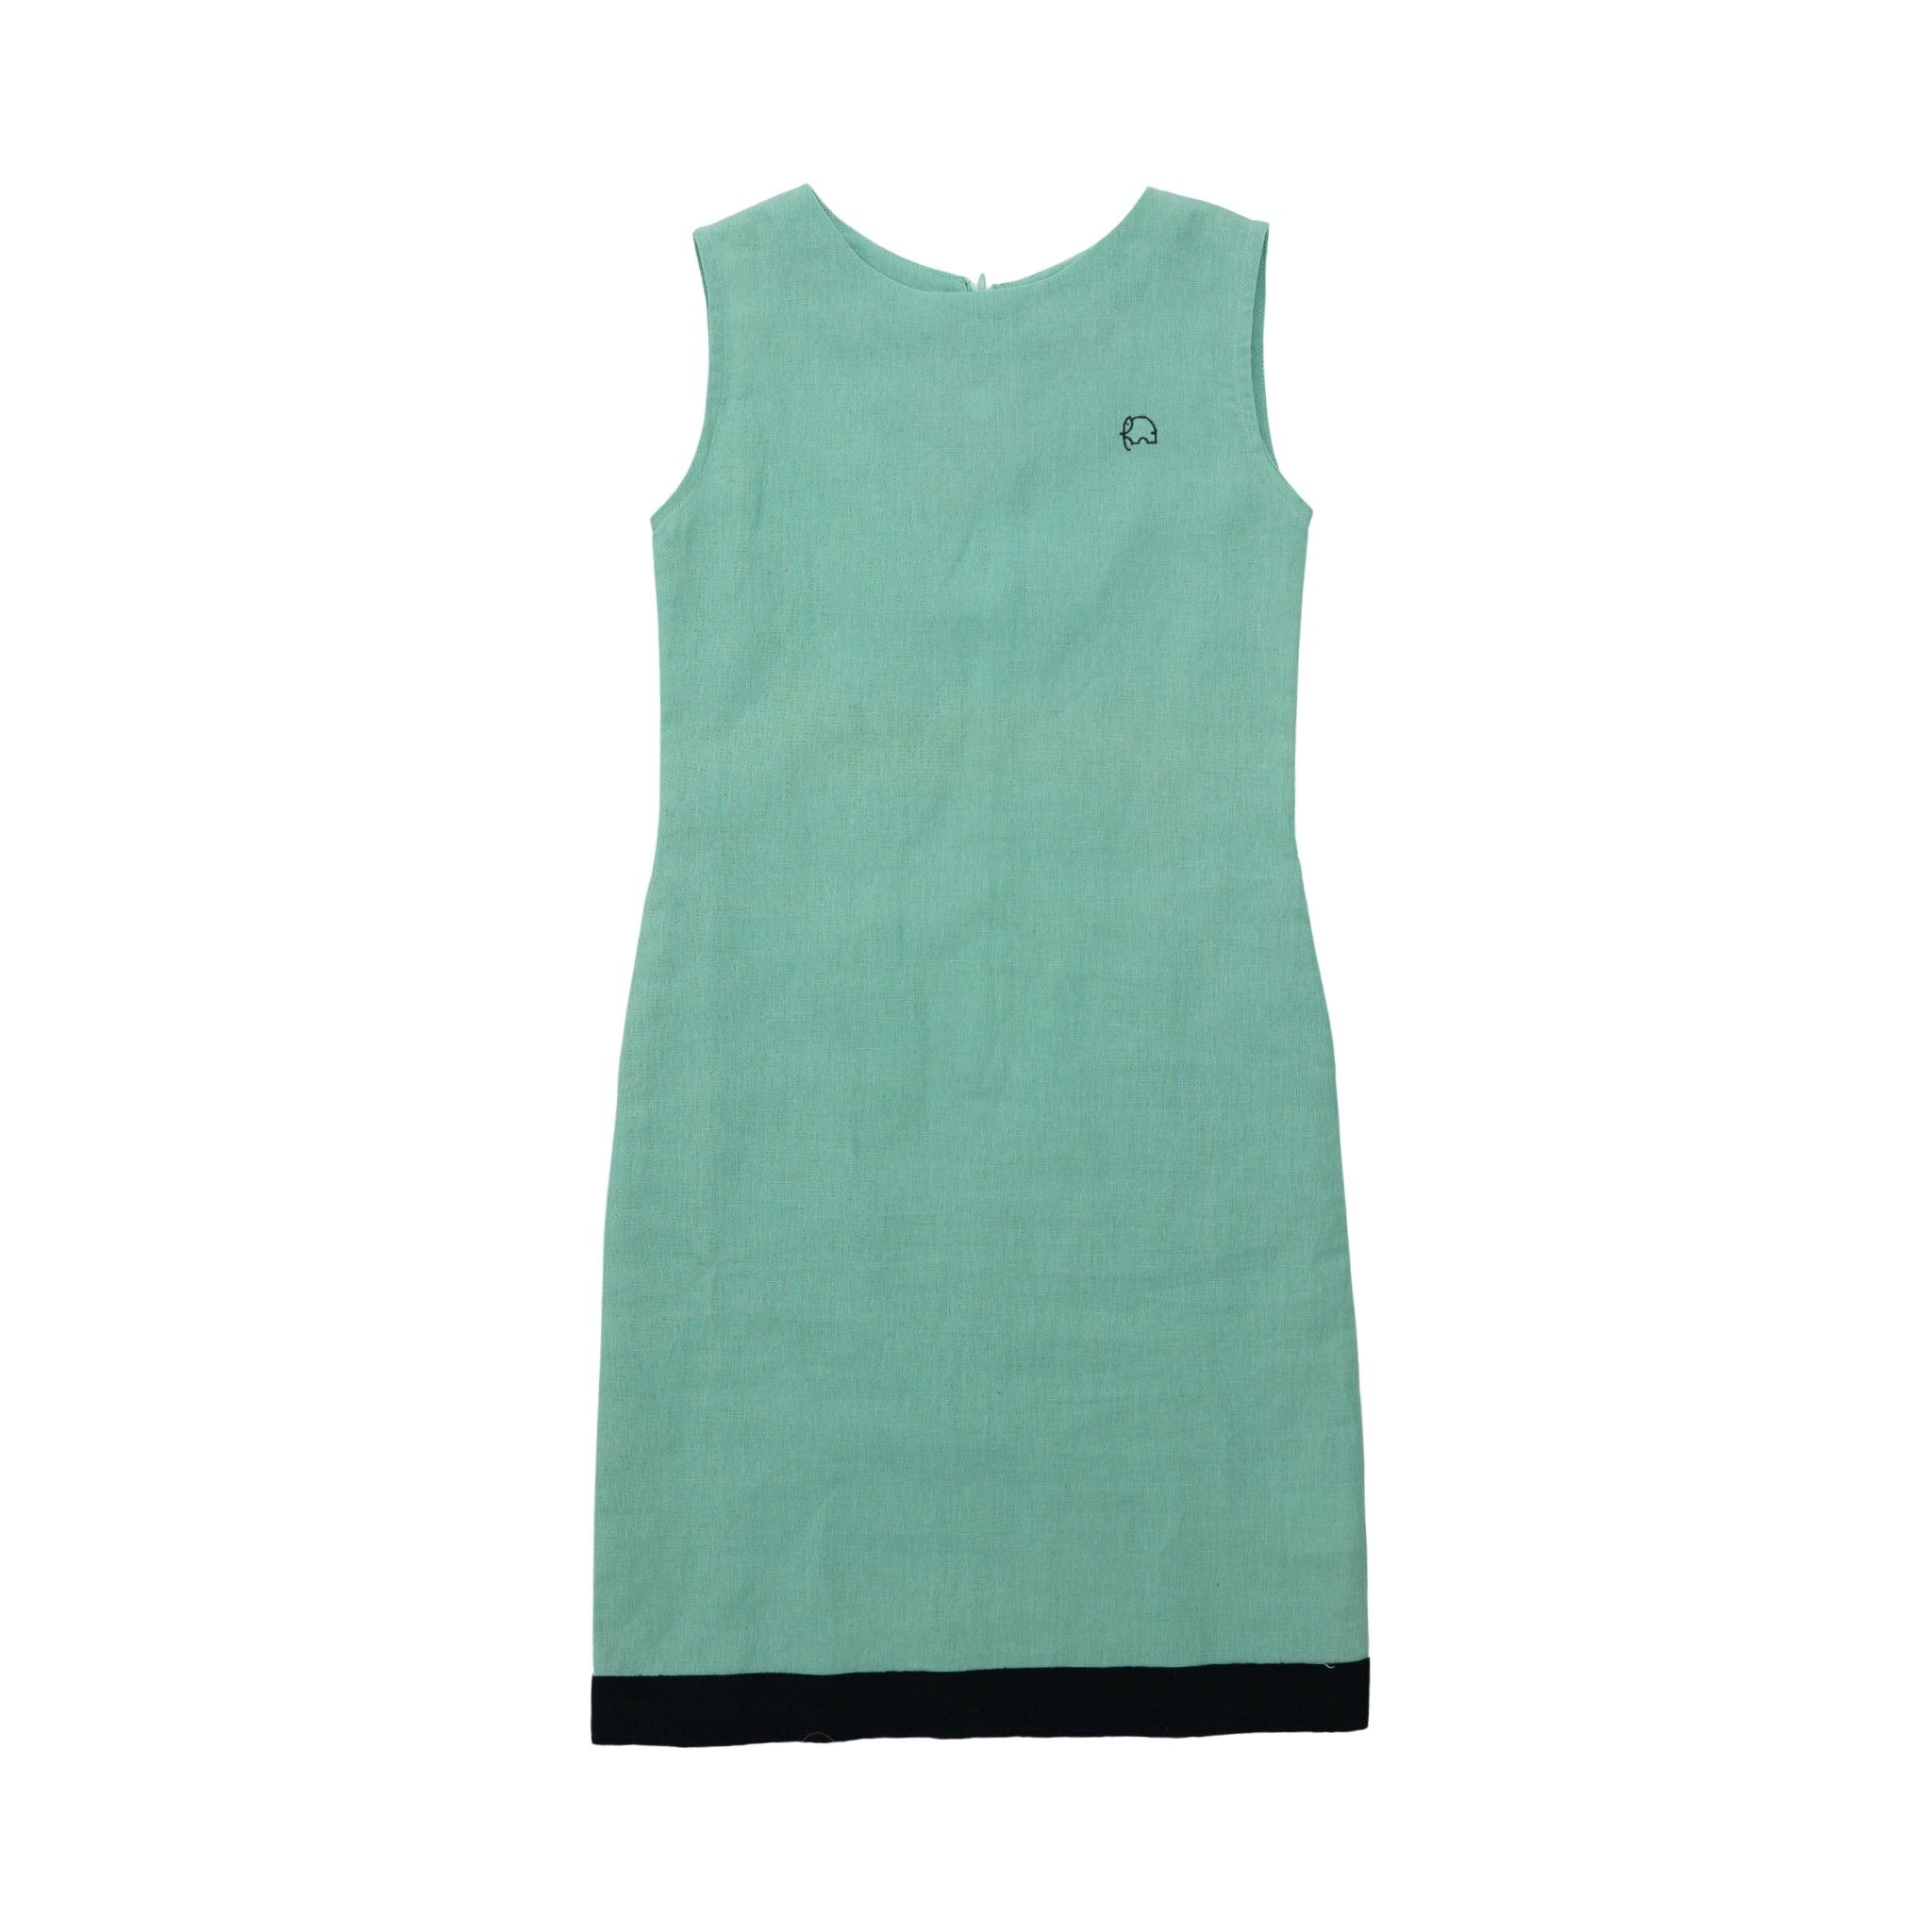 A sleeveless, Karee Neptune green shift dress with a black hemline, displayed against a white background.